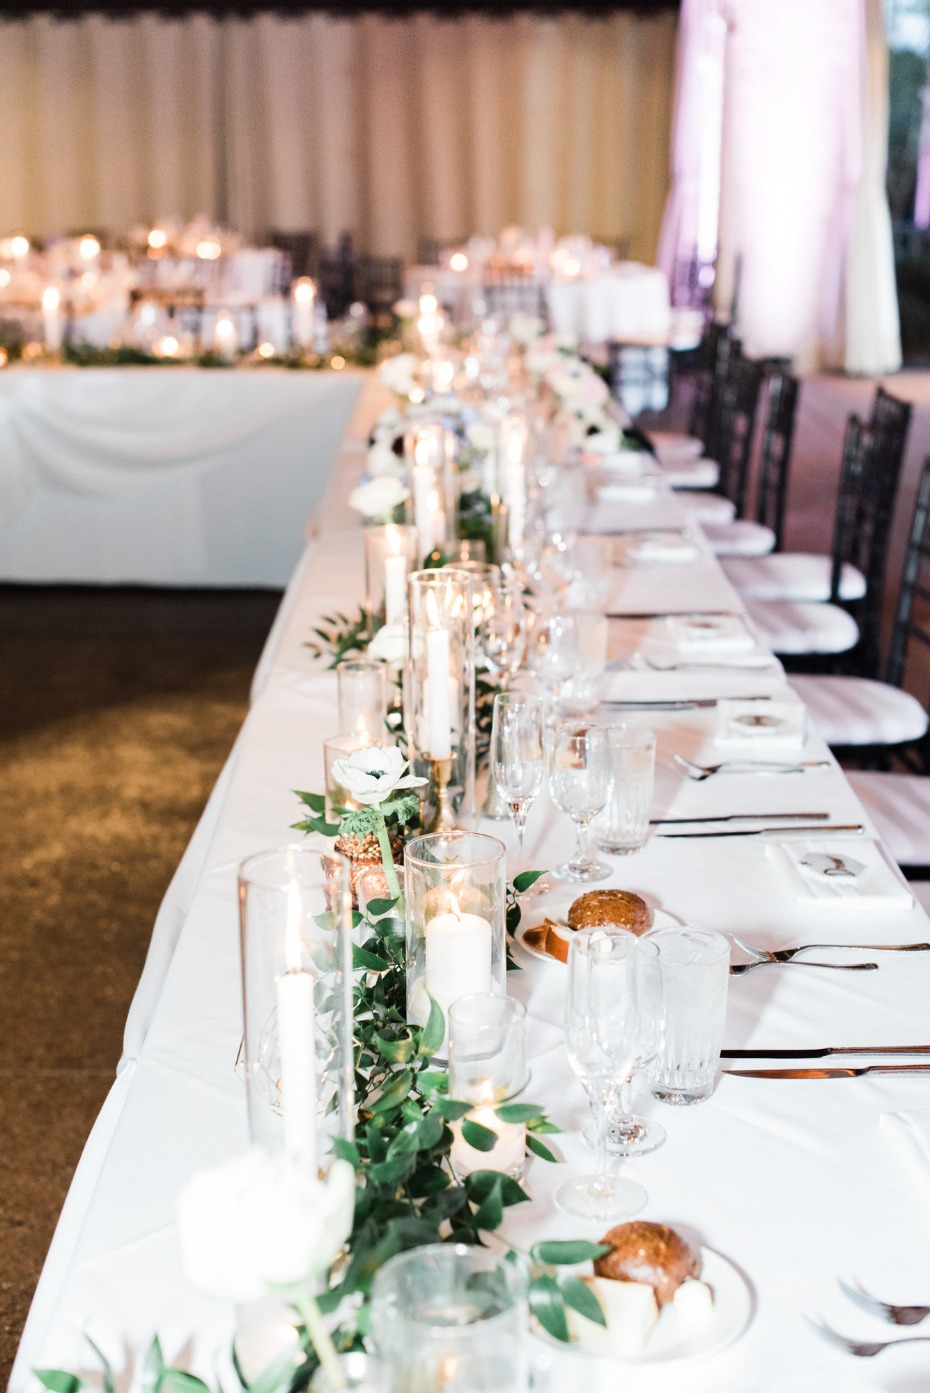 Simple table decor with greenery and candles